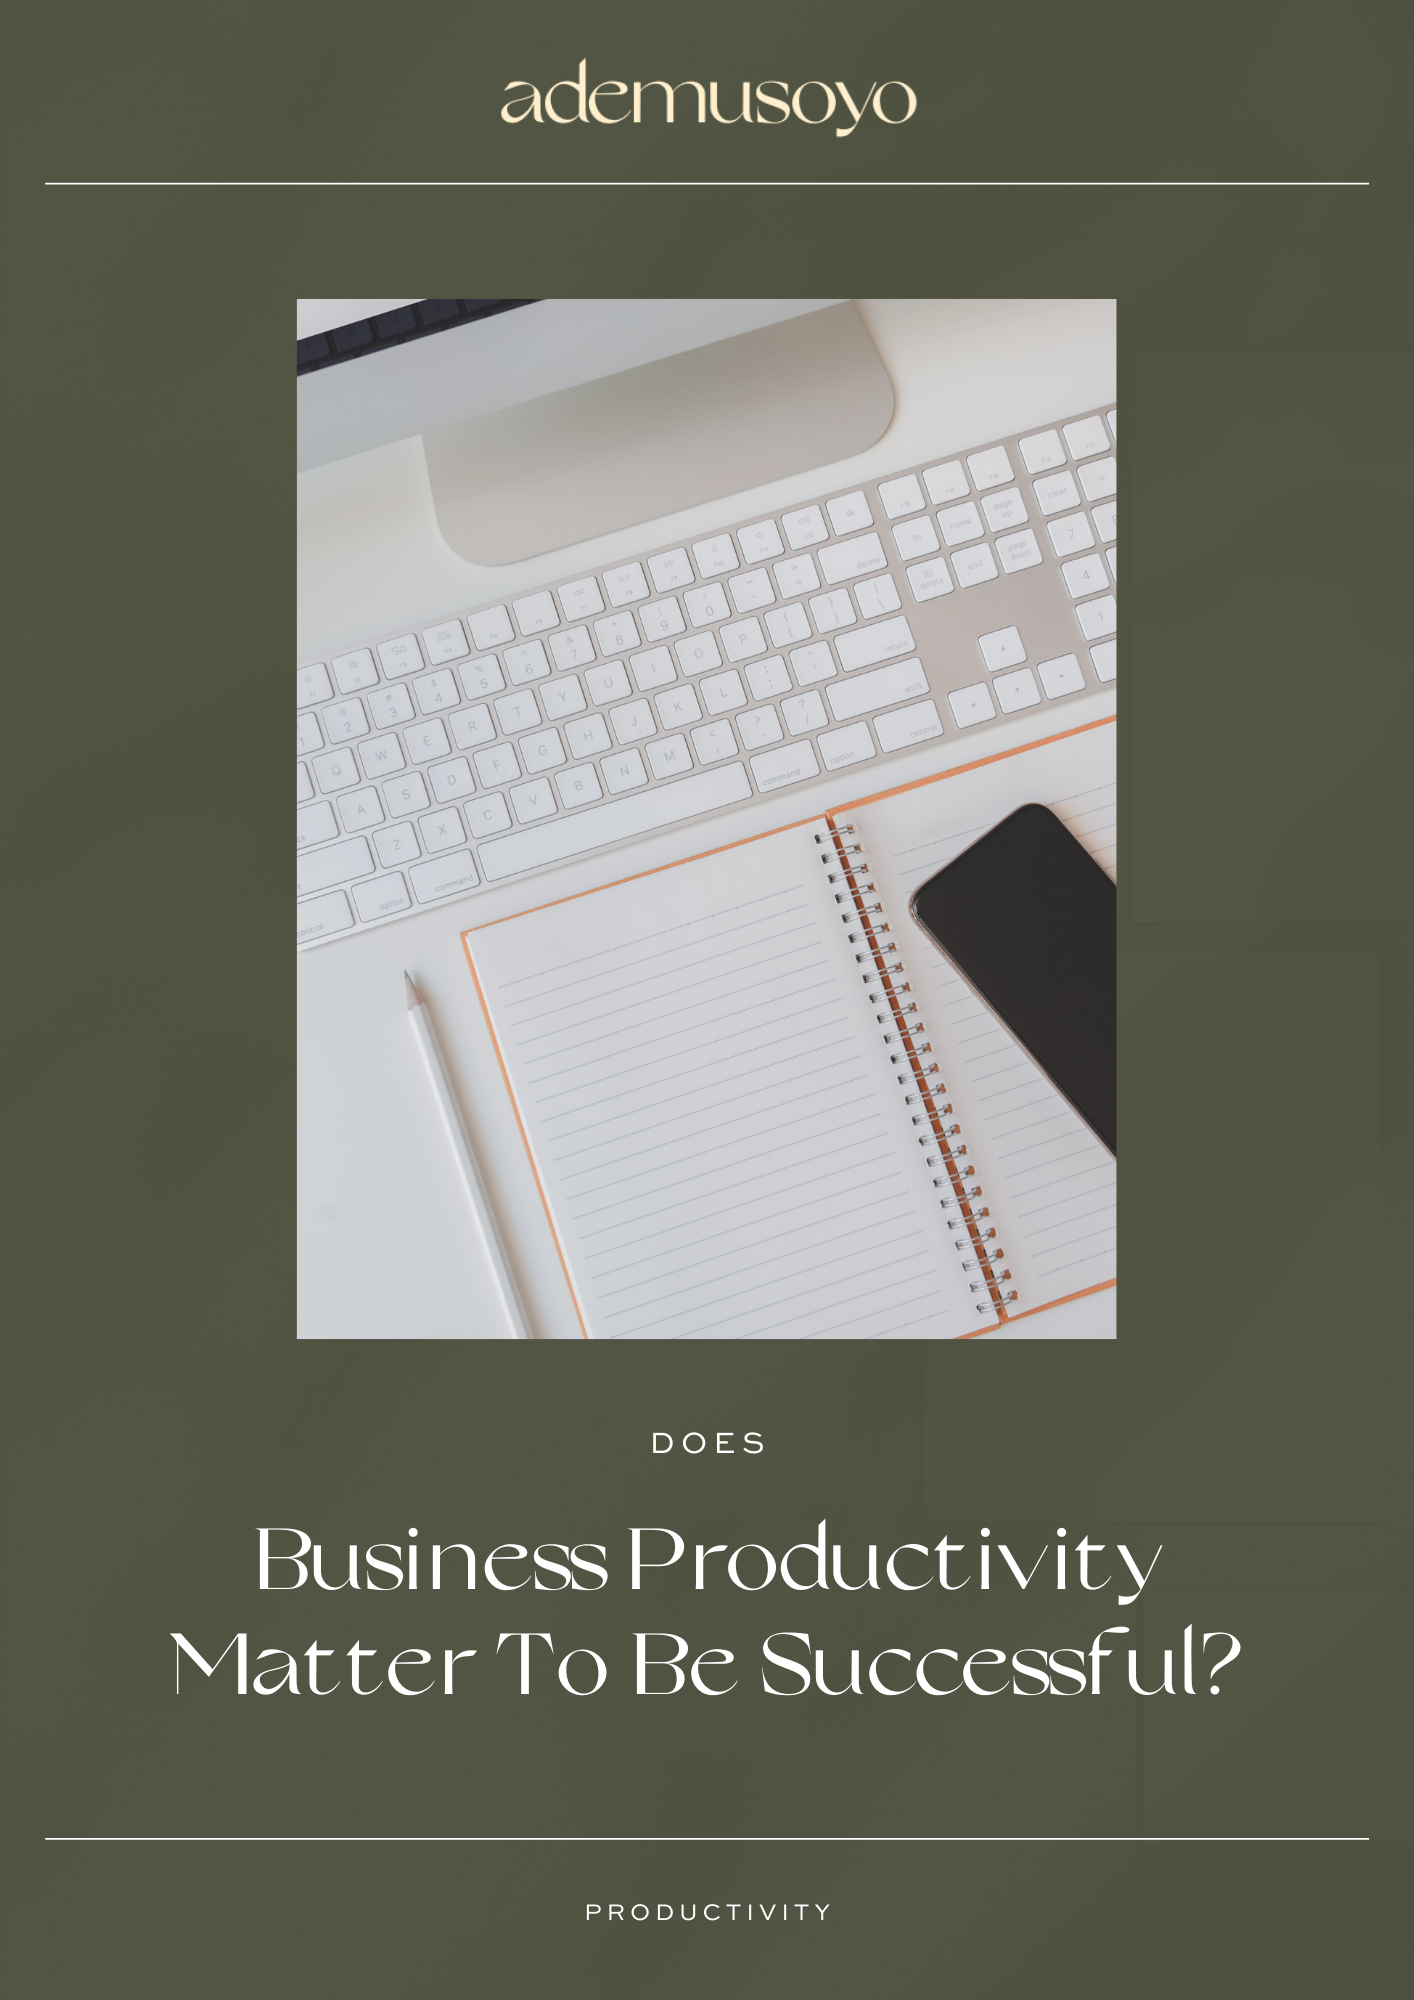 Does Business Productivity Matter To Be Successful?